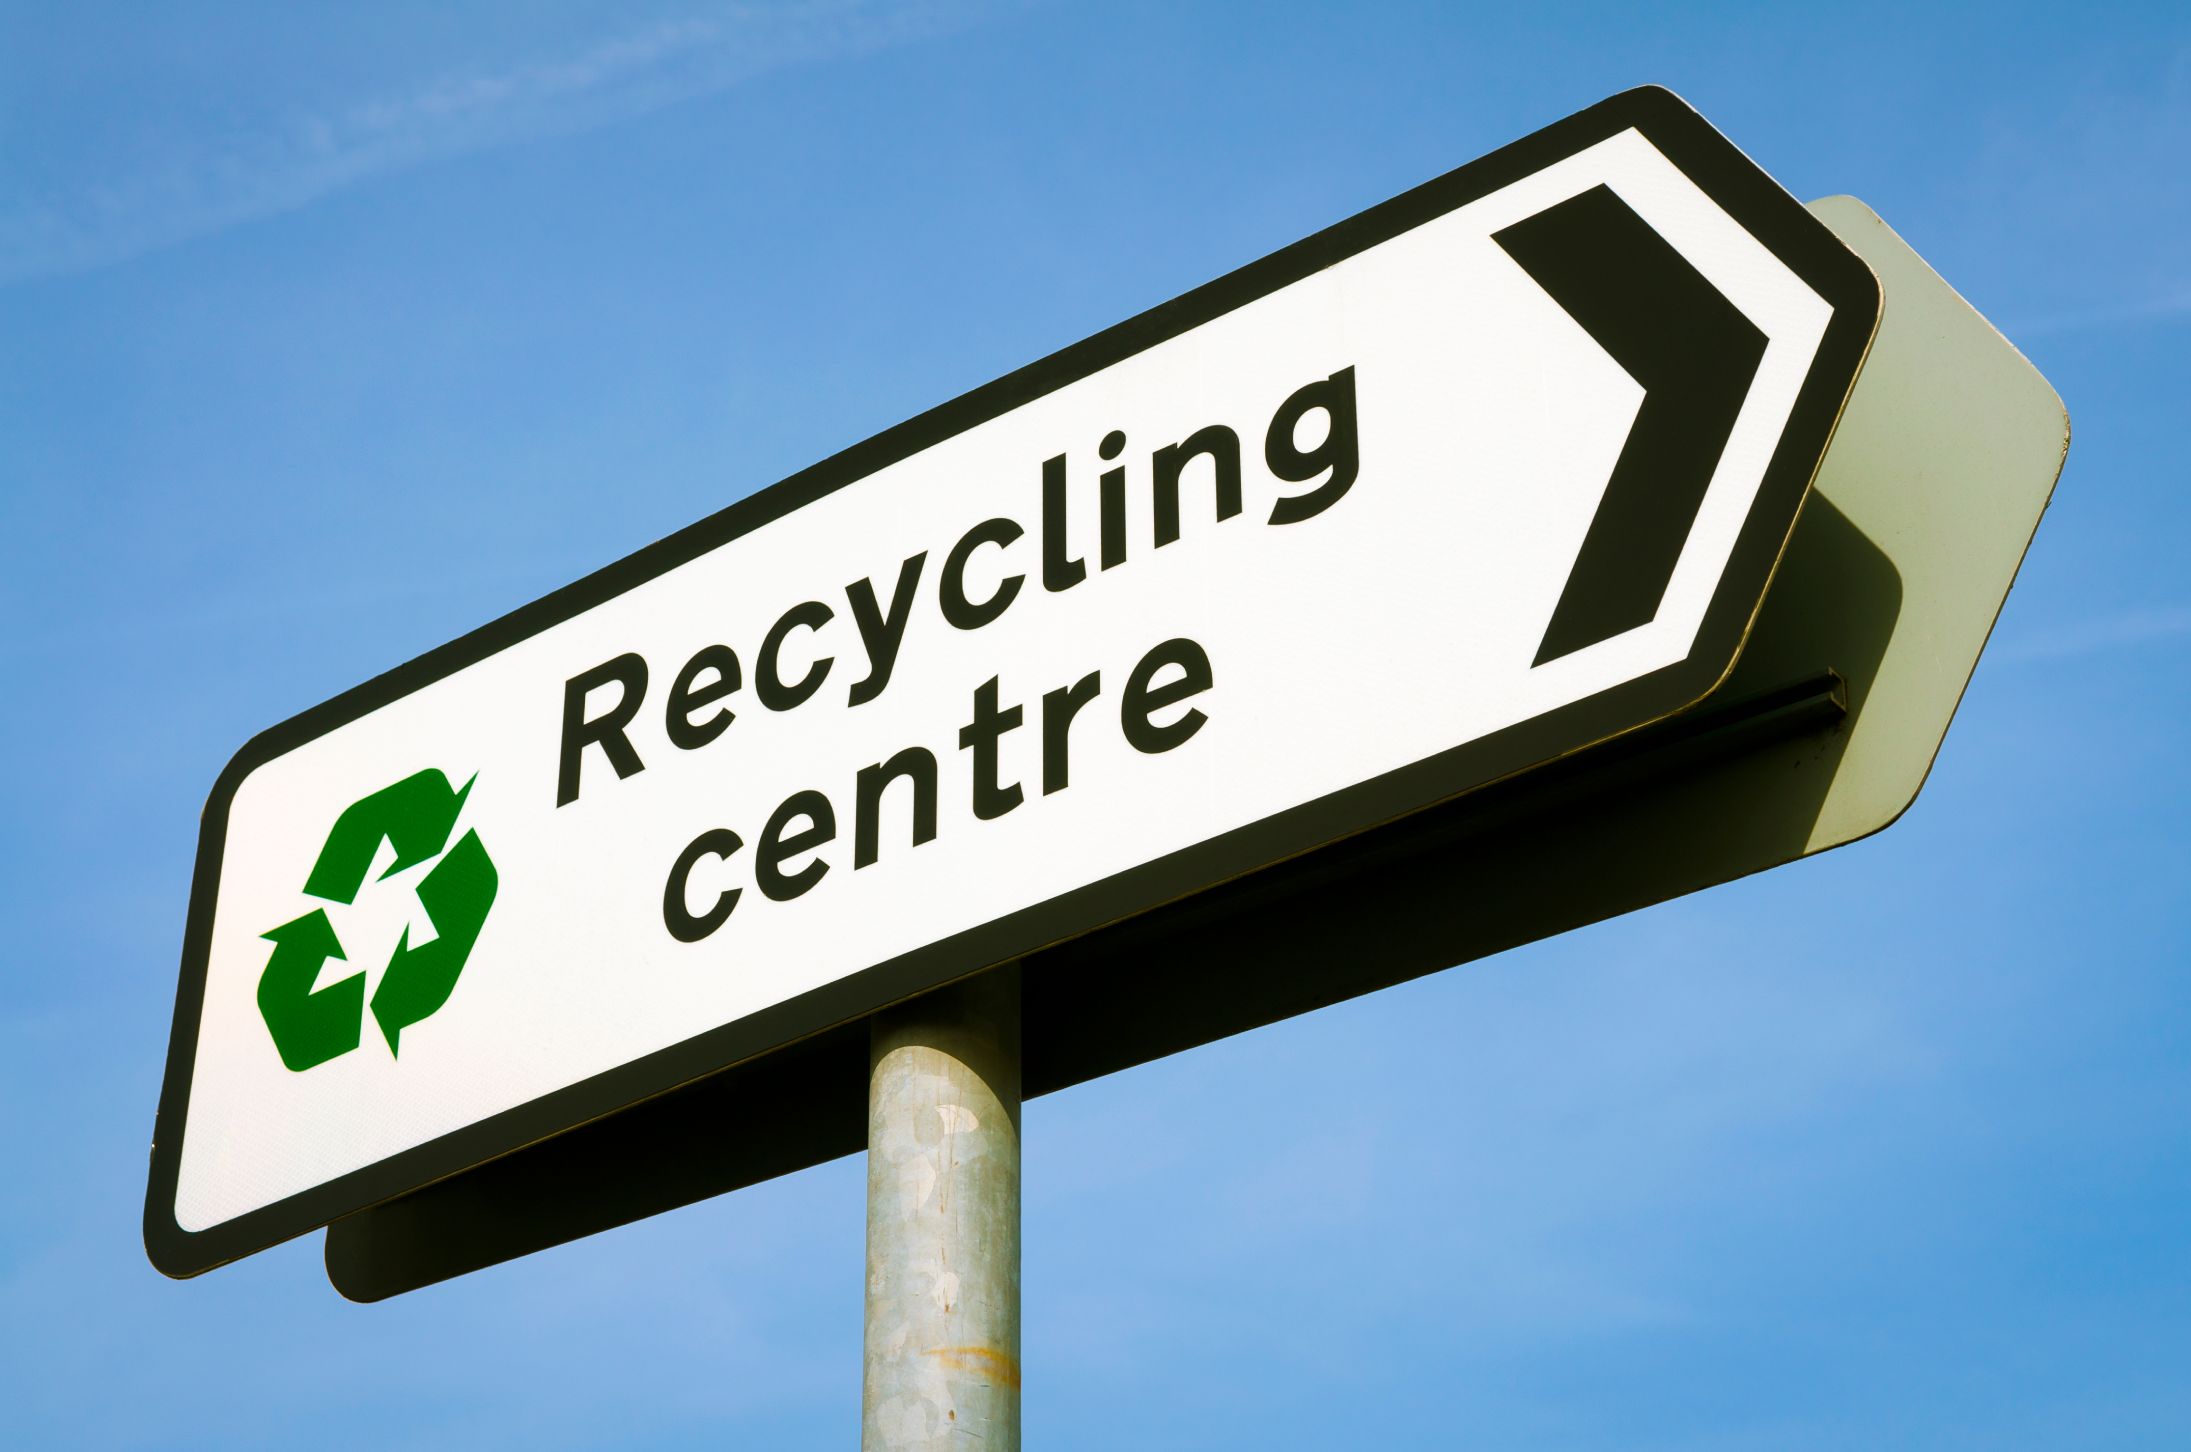 Where to find a recycling center?